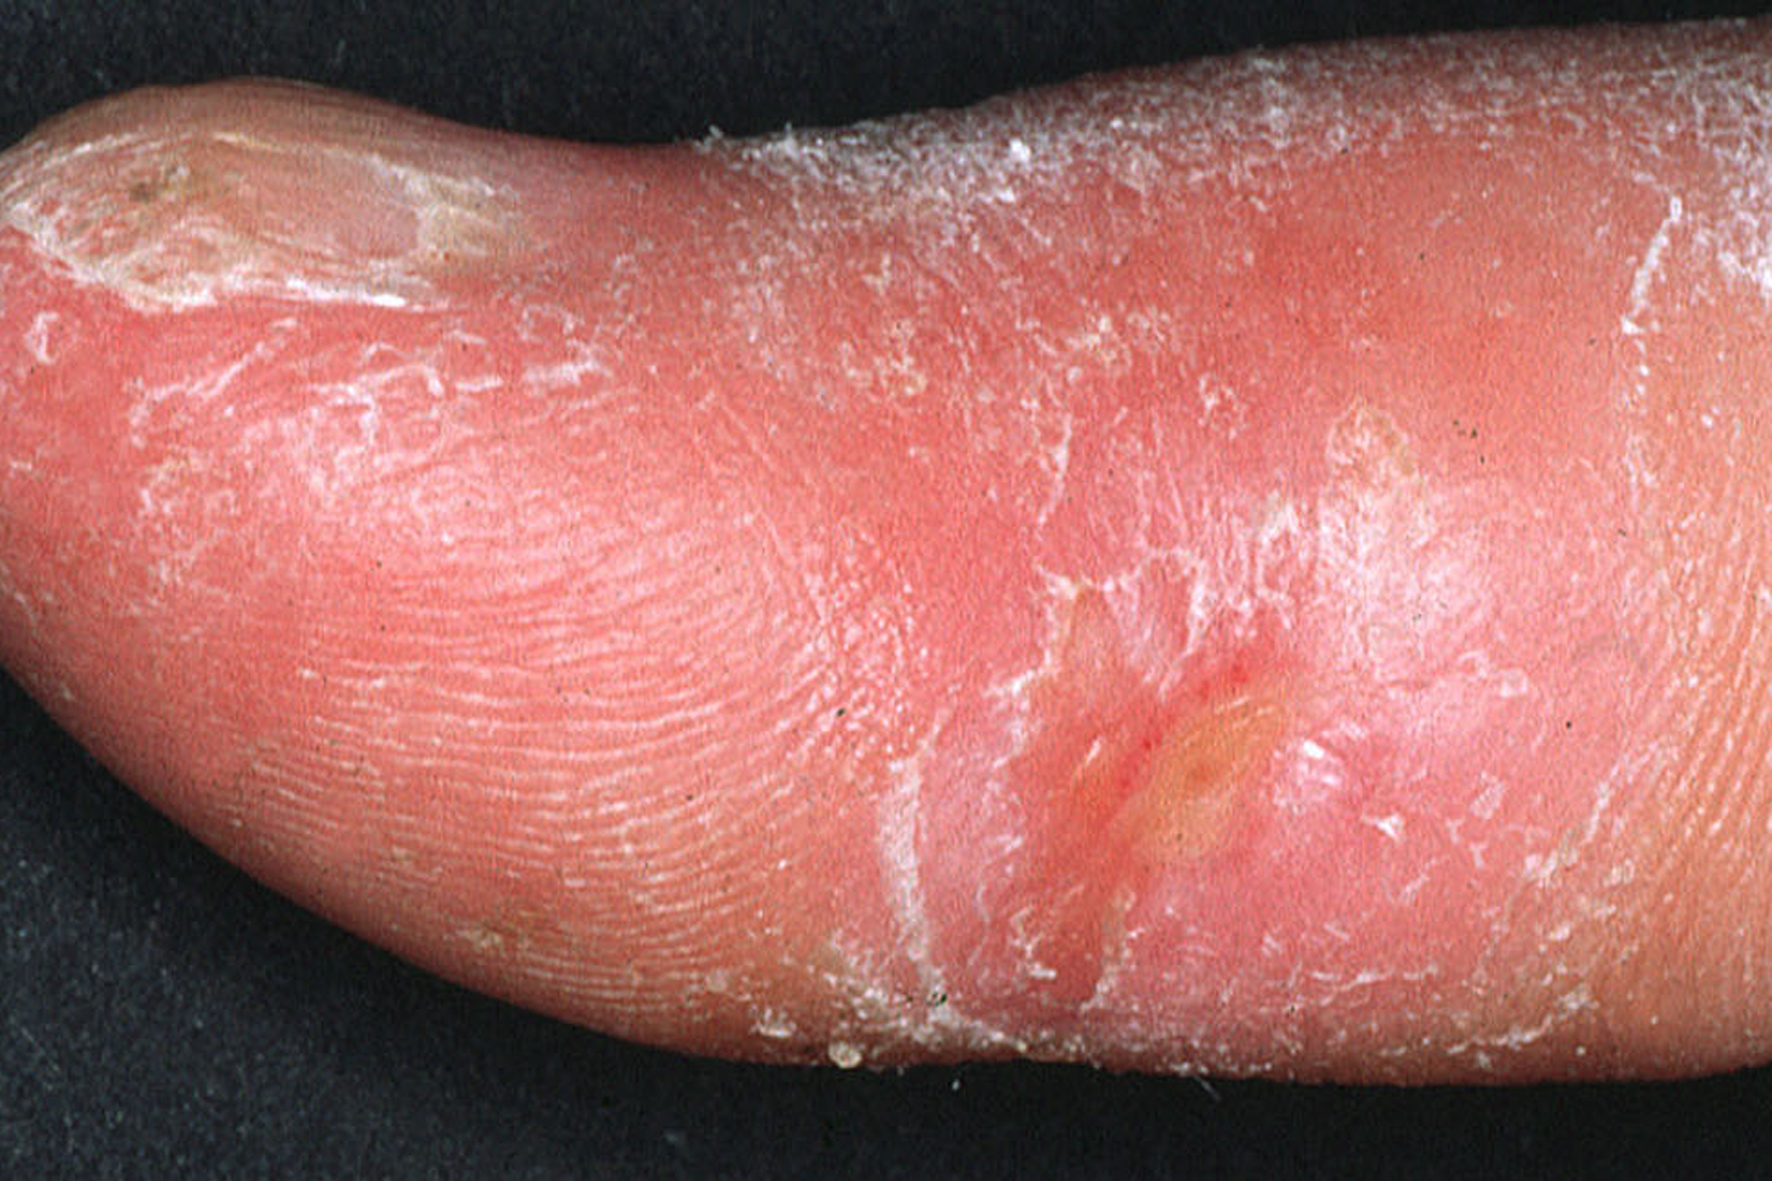 Clinical appearance of acrosclerotic piece-meal necrosis of the thumb in a patient with systemic sclerosis Source:Images courtesy of Professor Peter Anderson DVM PhD and published with permission © PEIR, University of Alabama at Birmingham, Department of Pathology [11]